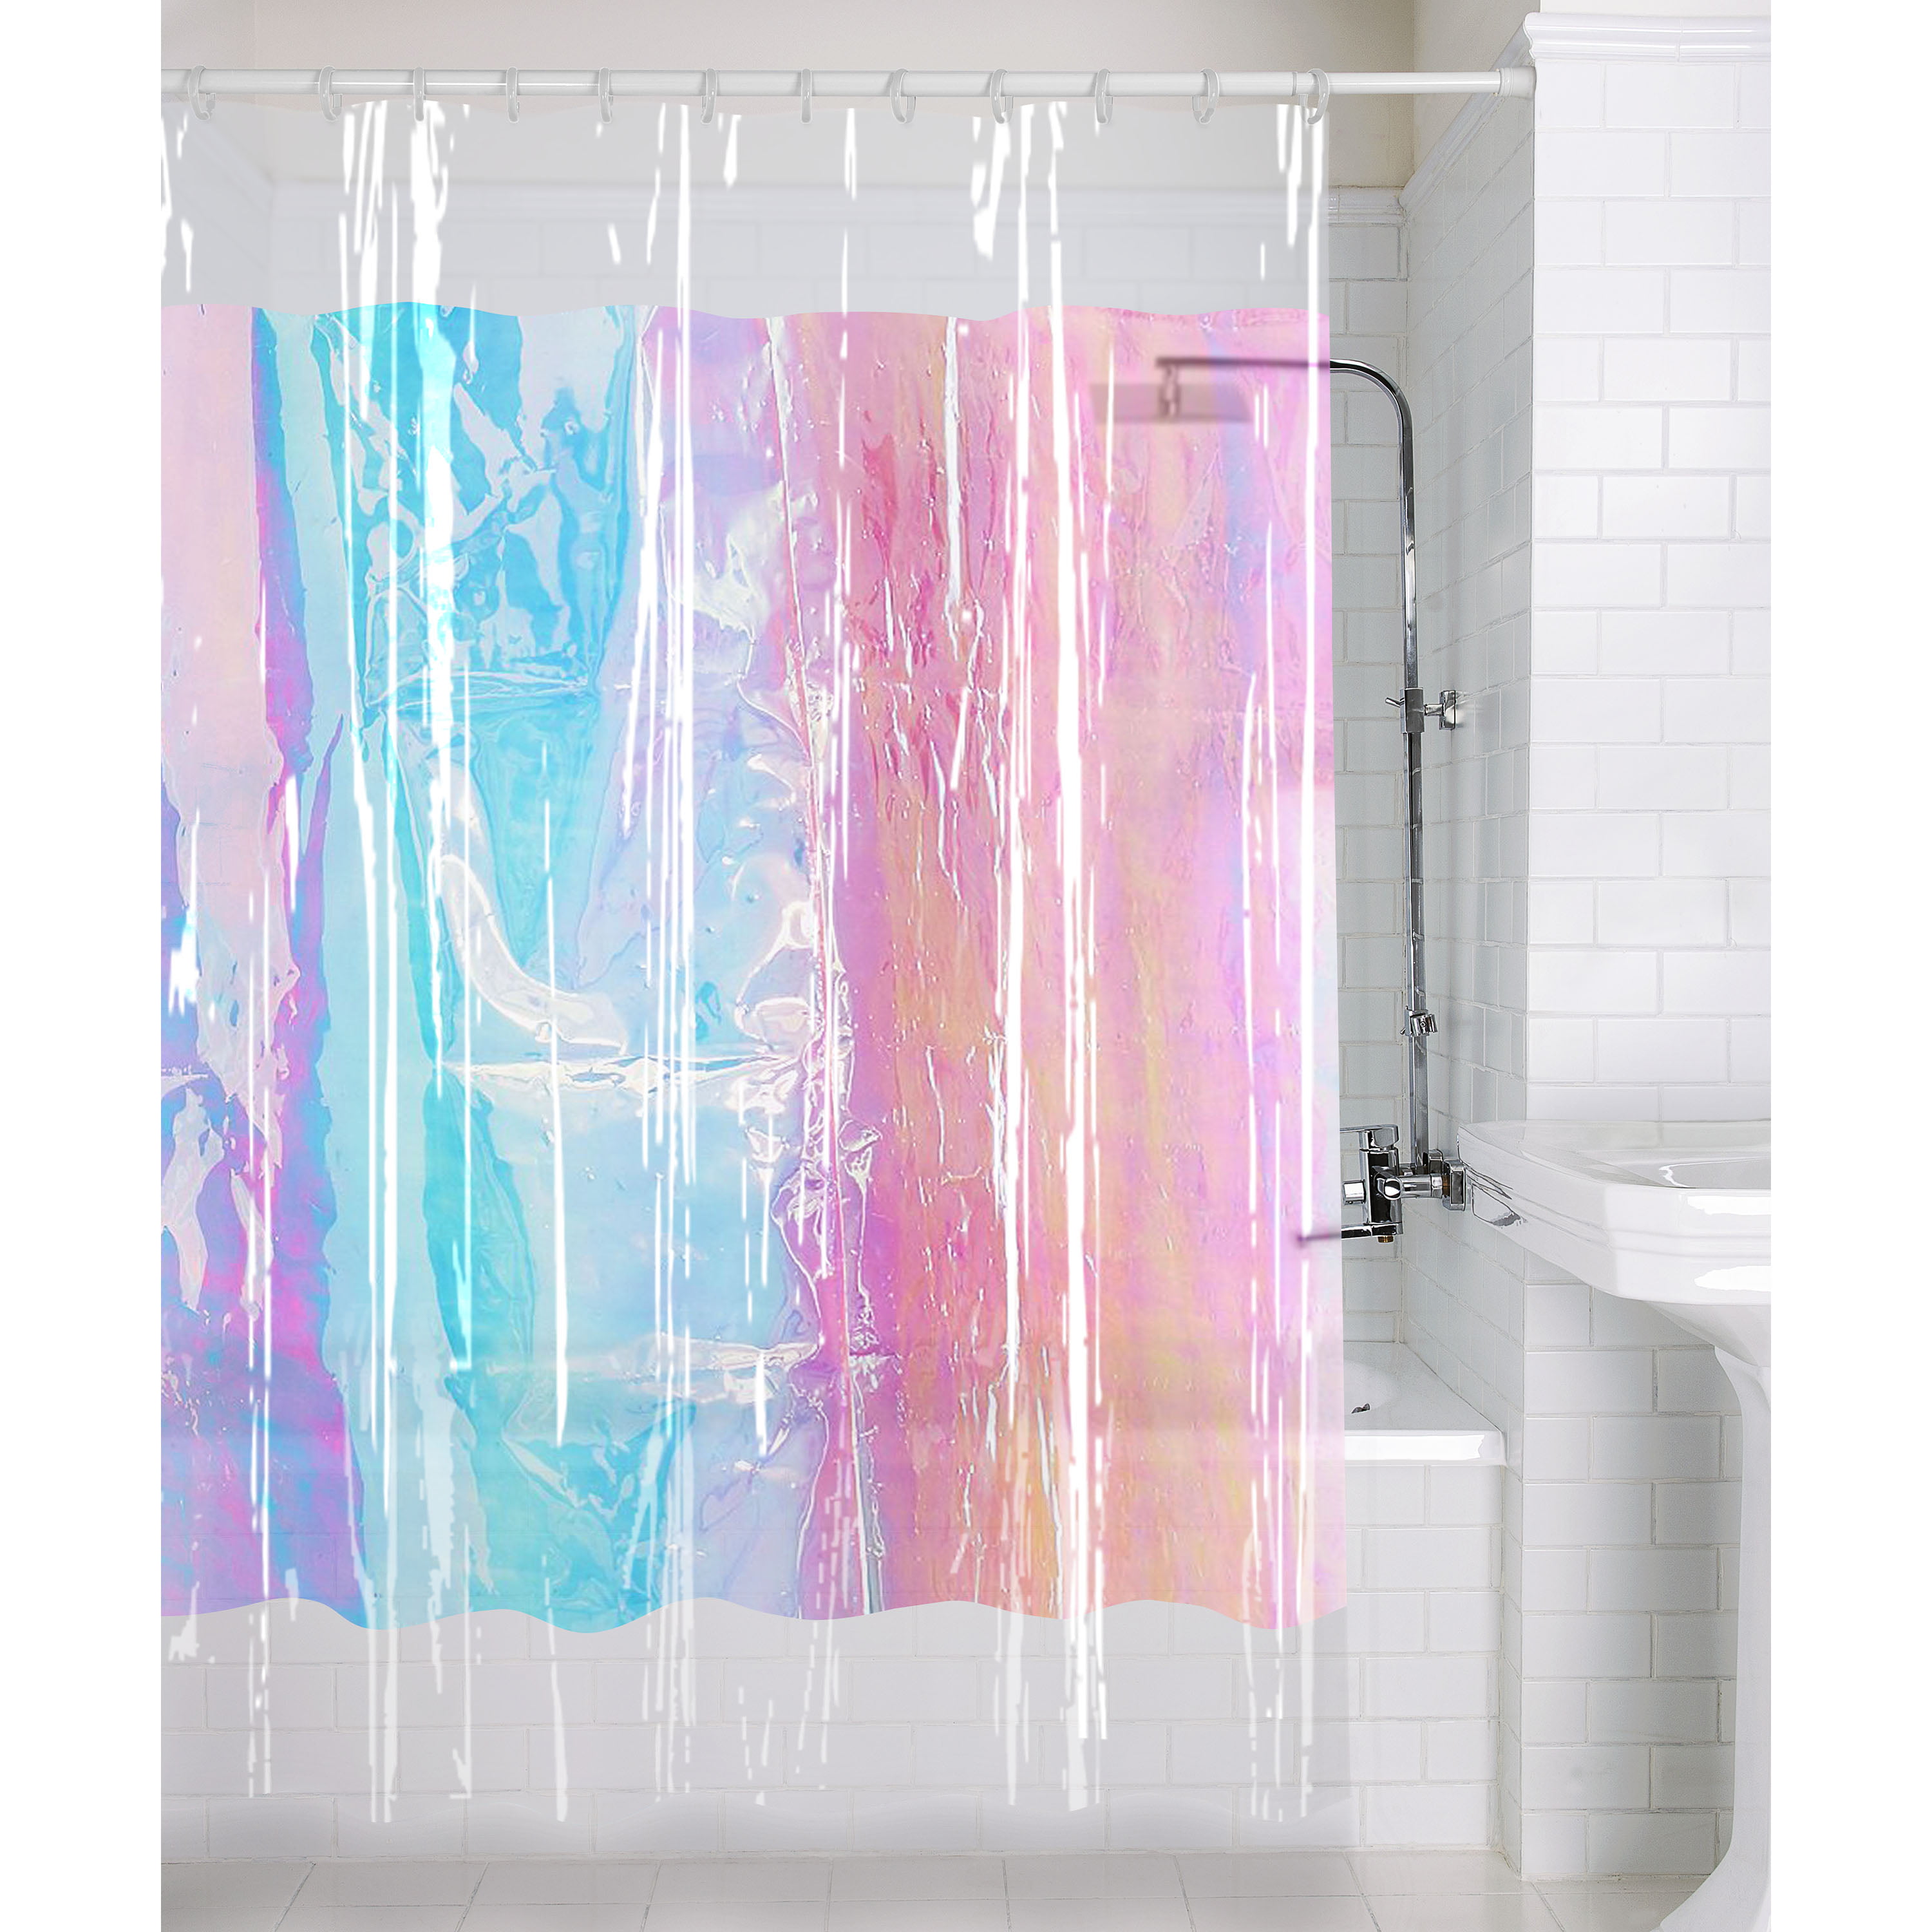 71" X 71 Iridescent Peva Shower Curtain By Allure Home Creation